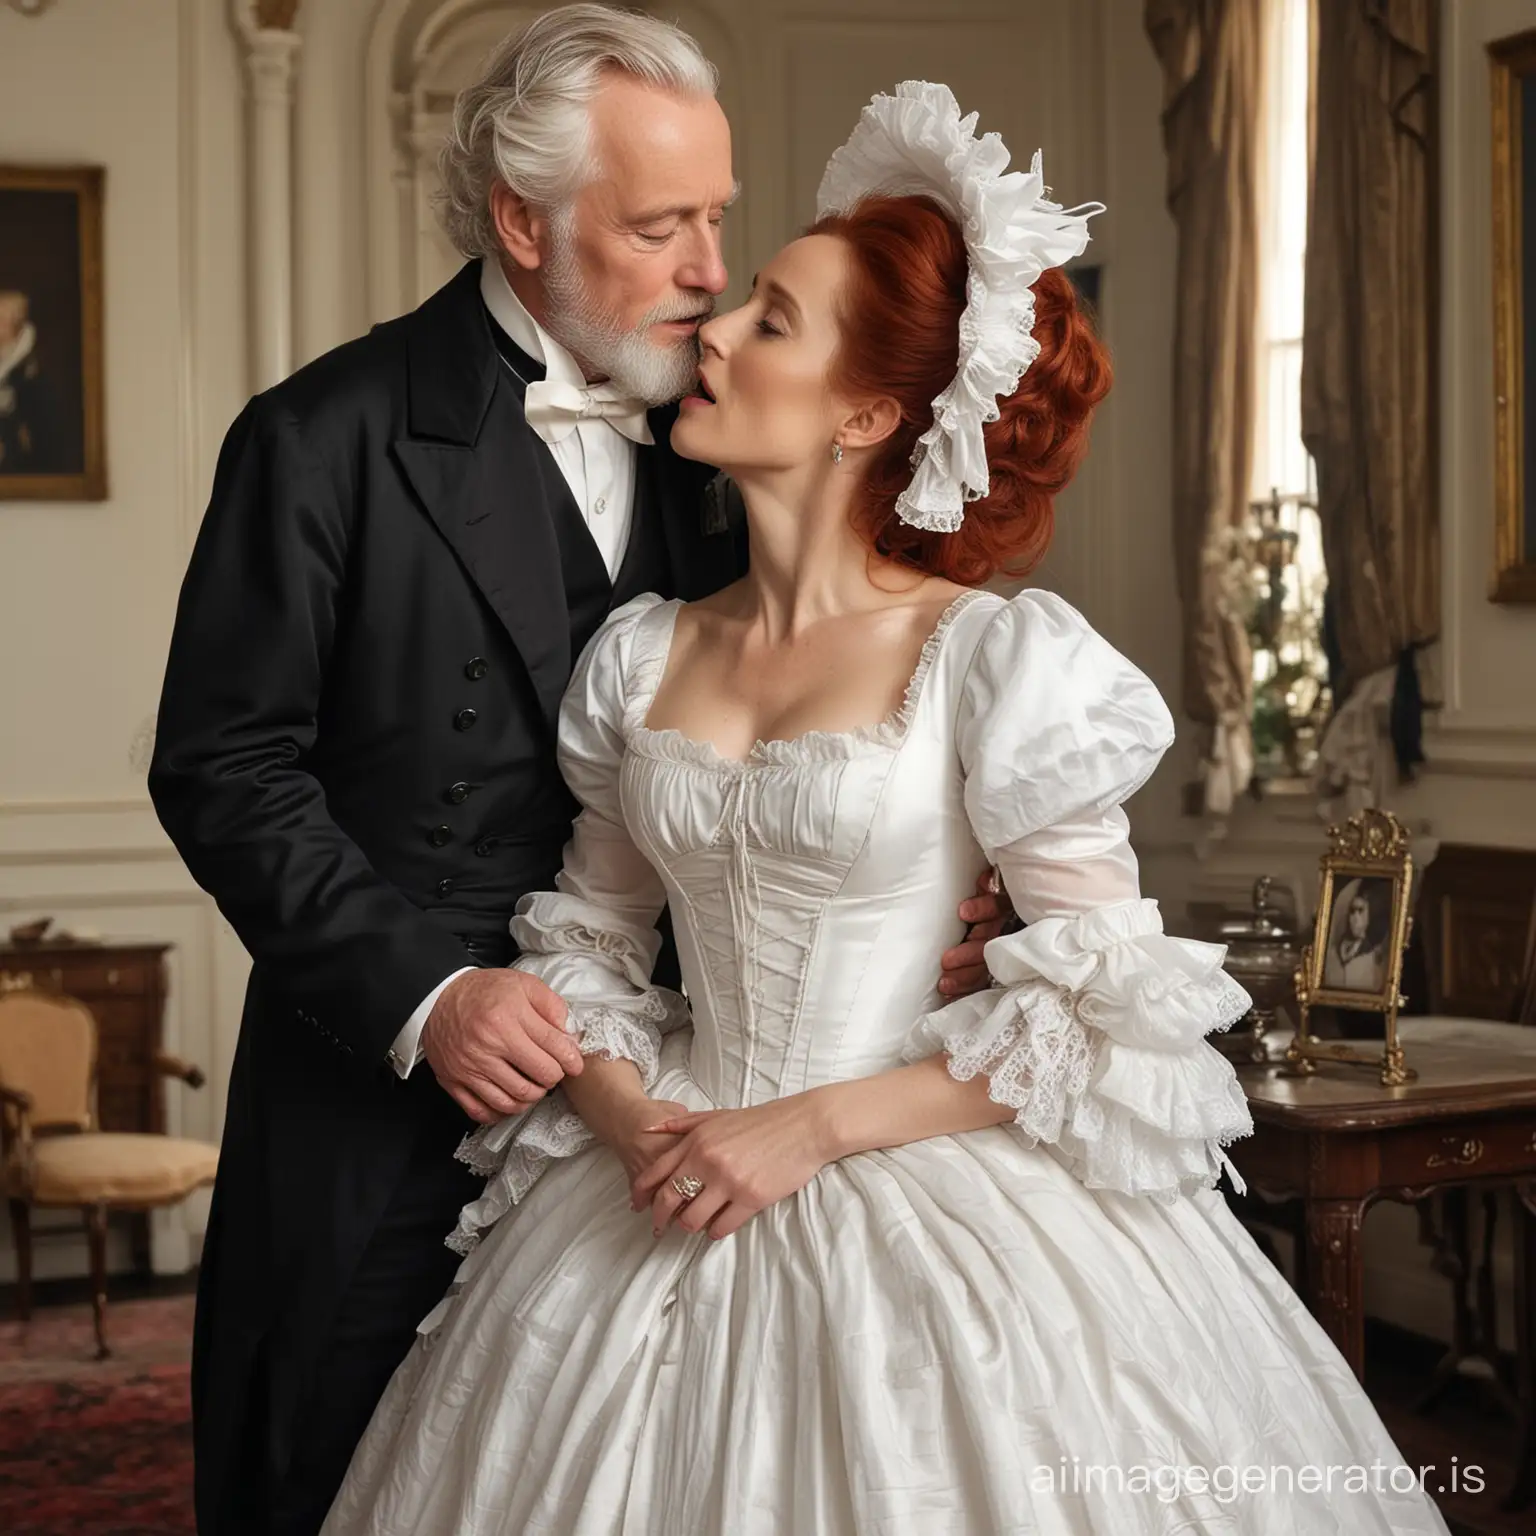 Victorian-Newlyweds-Embrace-RedHaired-Gillian-Anderson-and-Her-Elderly-Husband-Share-a-Tender-Kiss